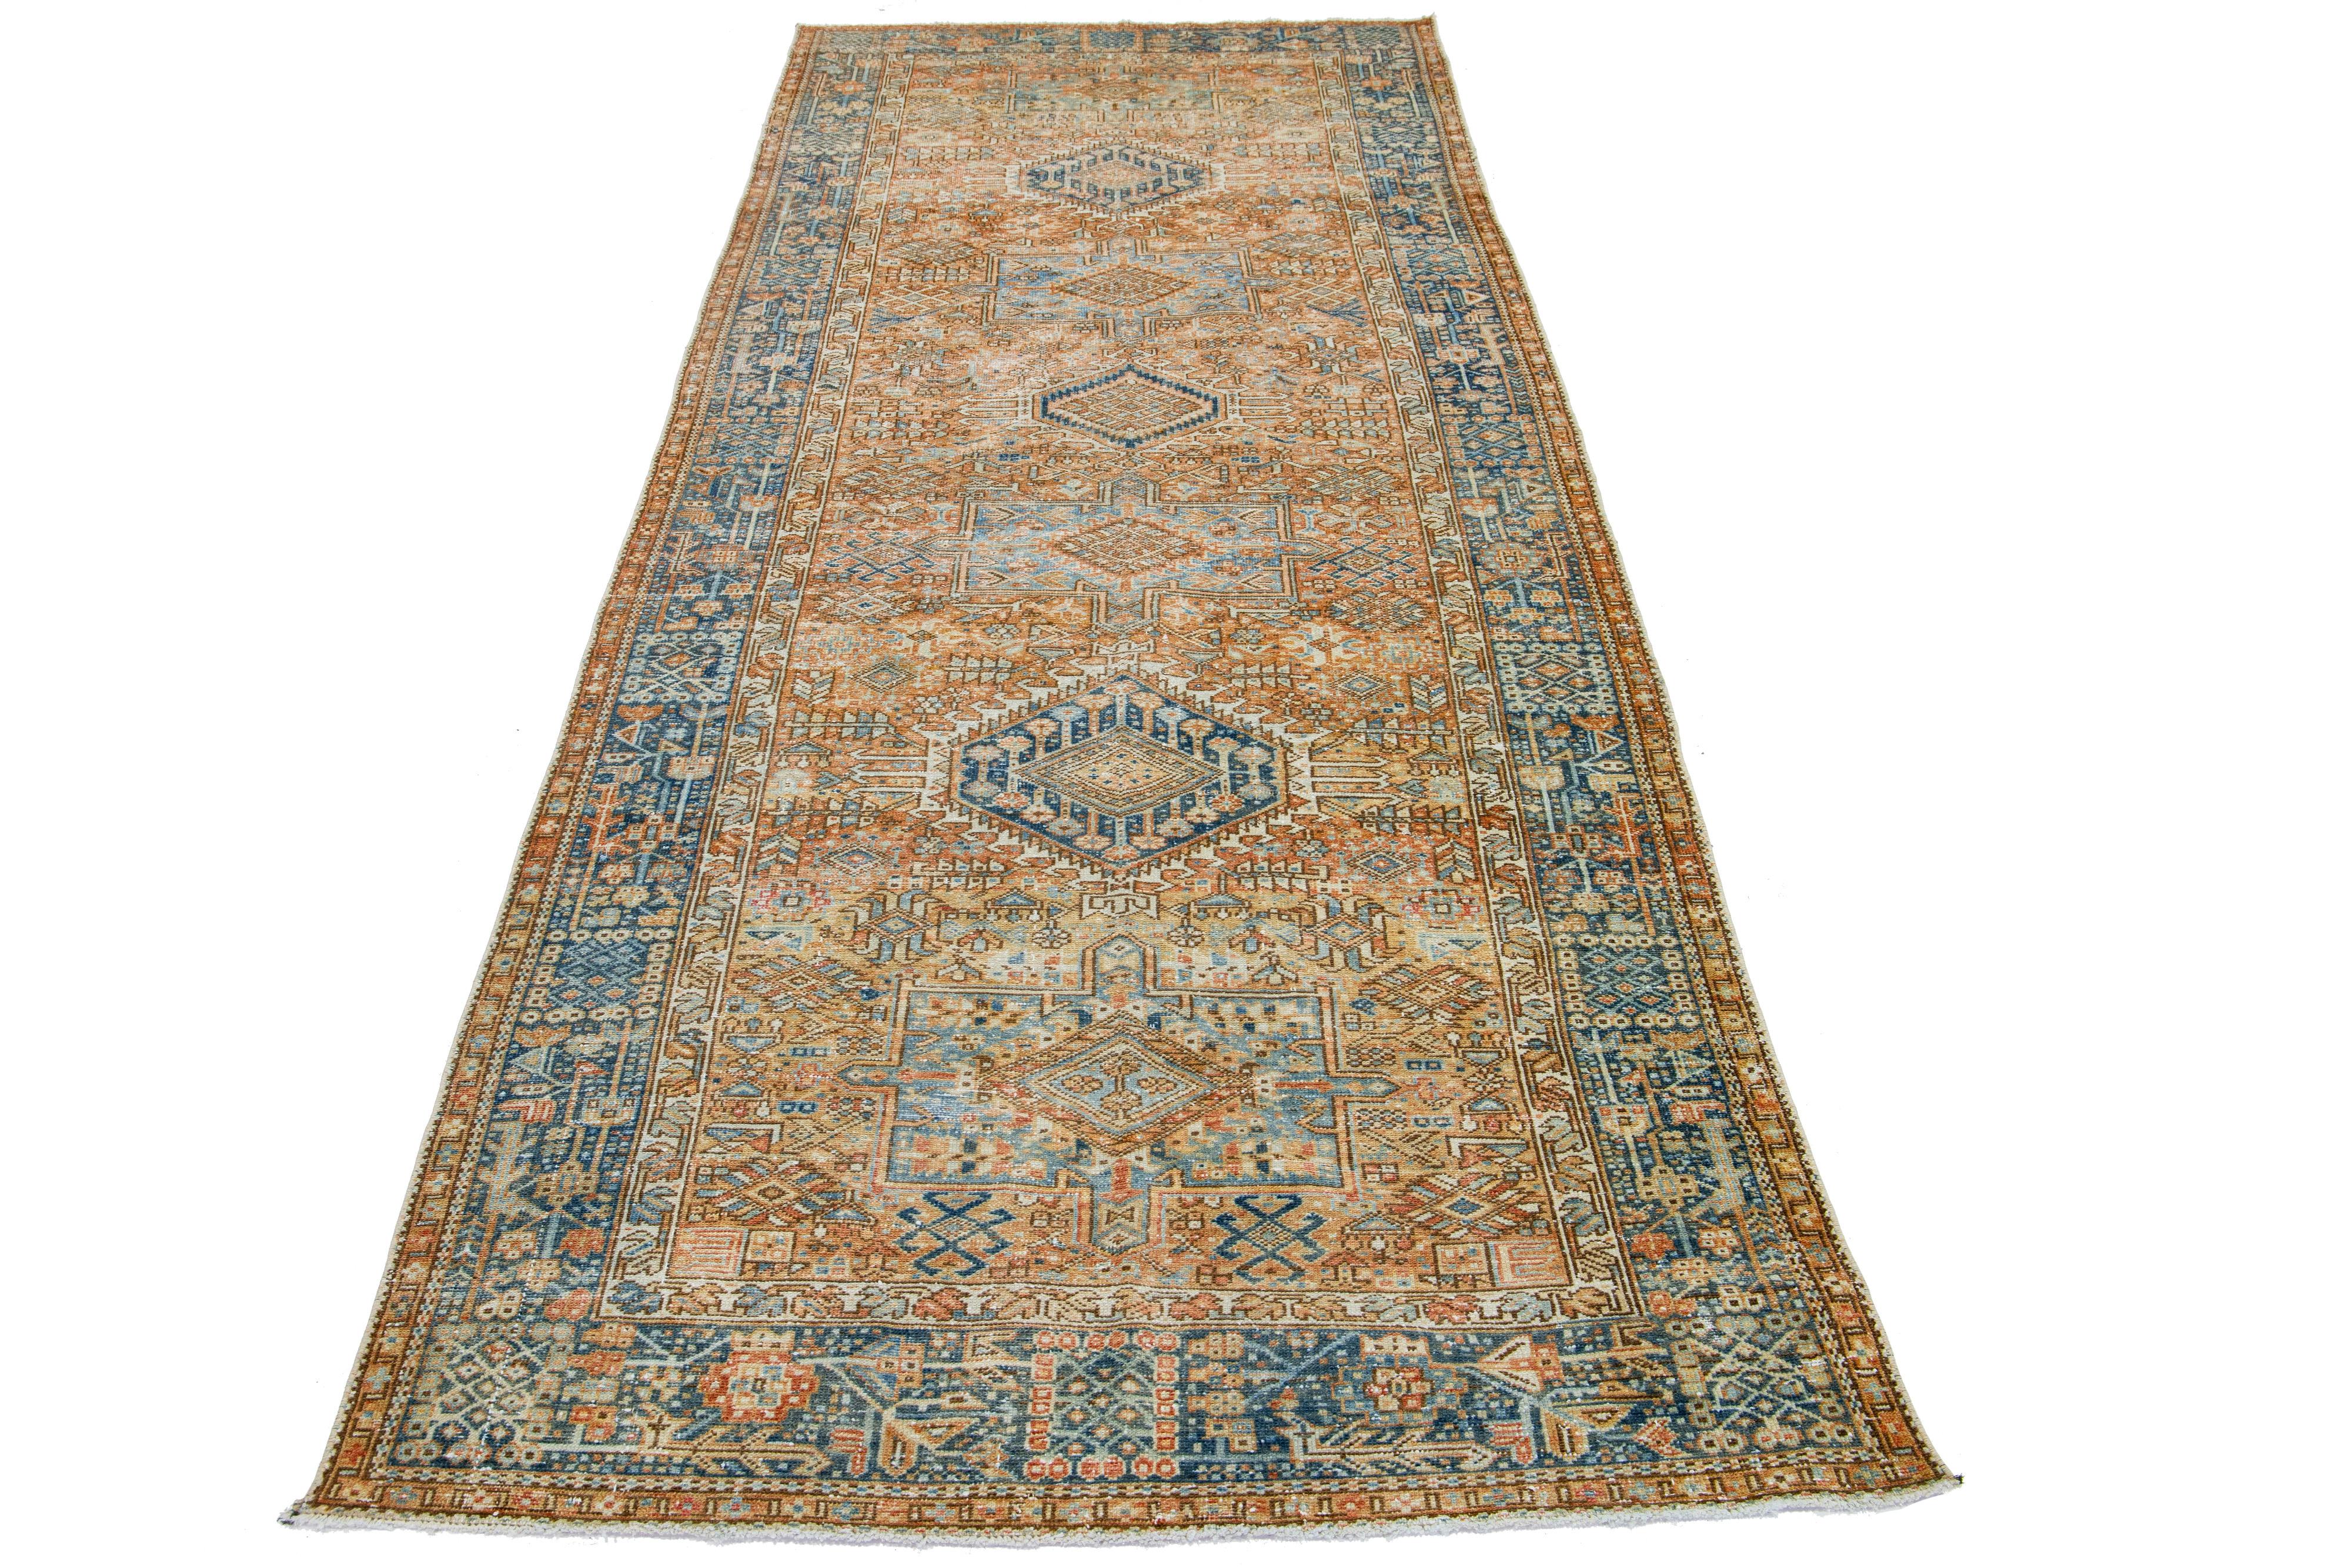 This is a beautiful 20th-century Heriz hand-knotted wool runner with an orange field. The piece boasts stunning blue and beige accents in an exquisite tribal geometric design.

This rug measures 4'7